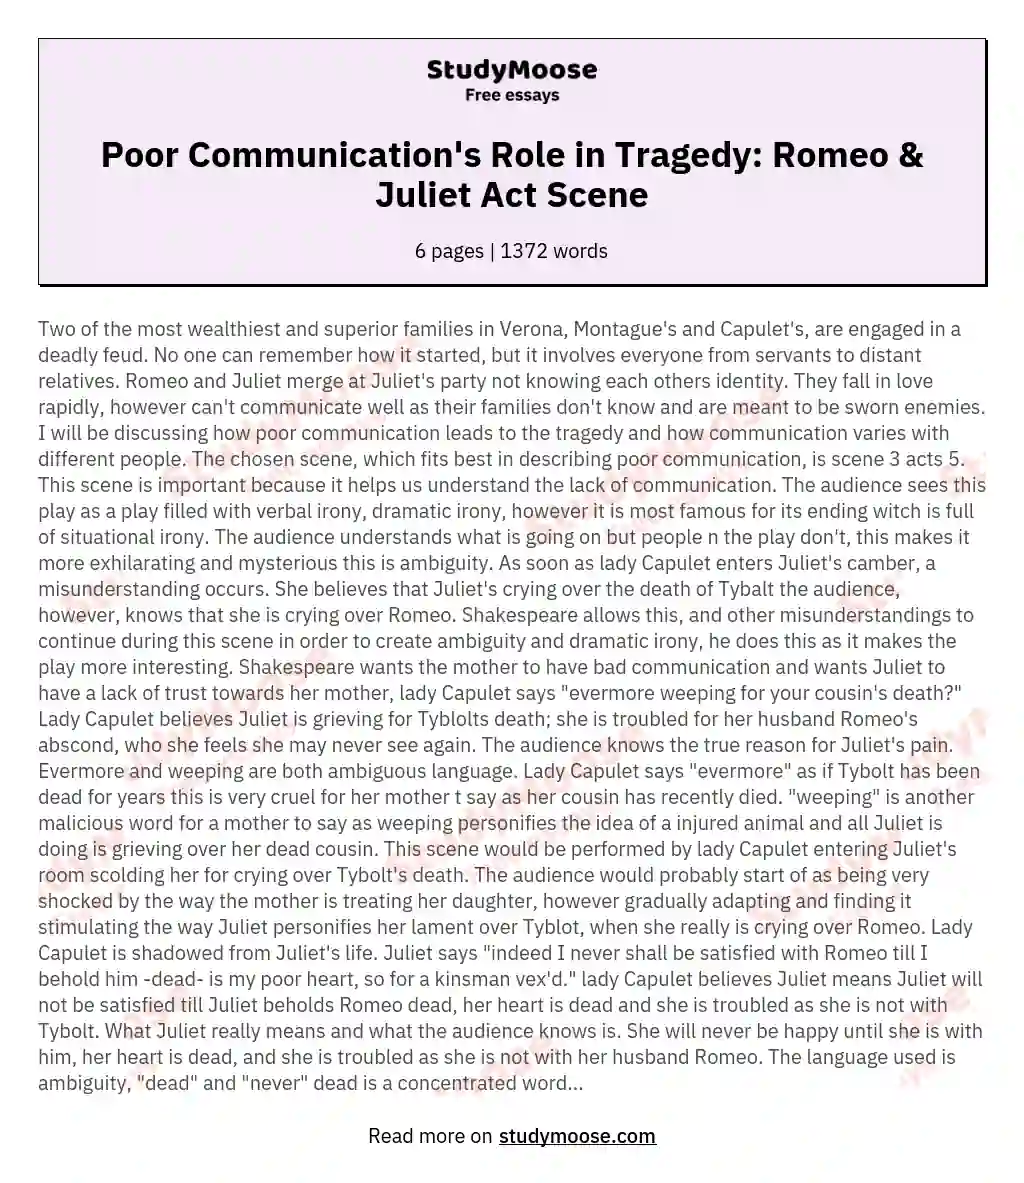 Poor Communication's Role in Tragedy: Romeo & Juliet Act  Scene essay